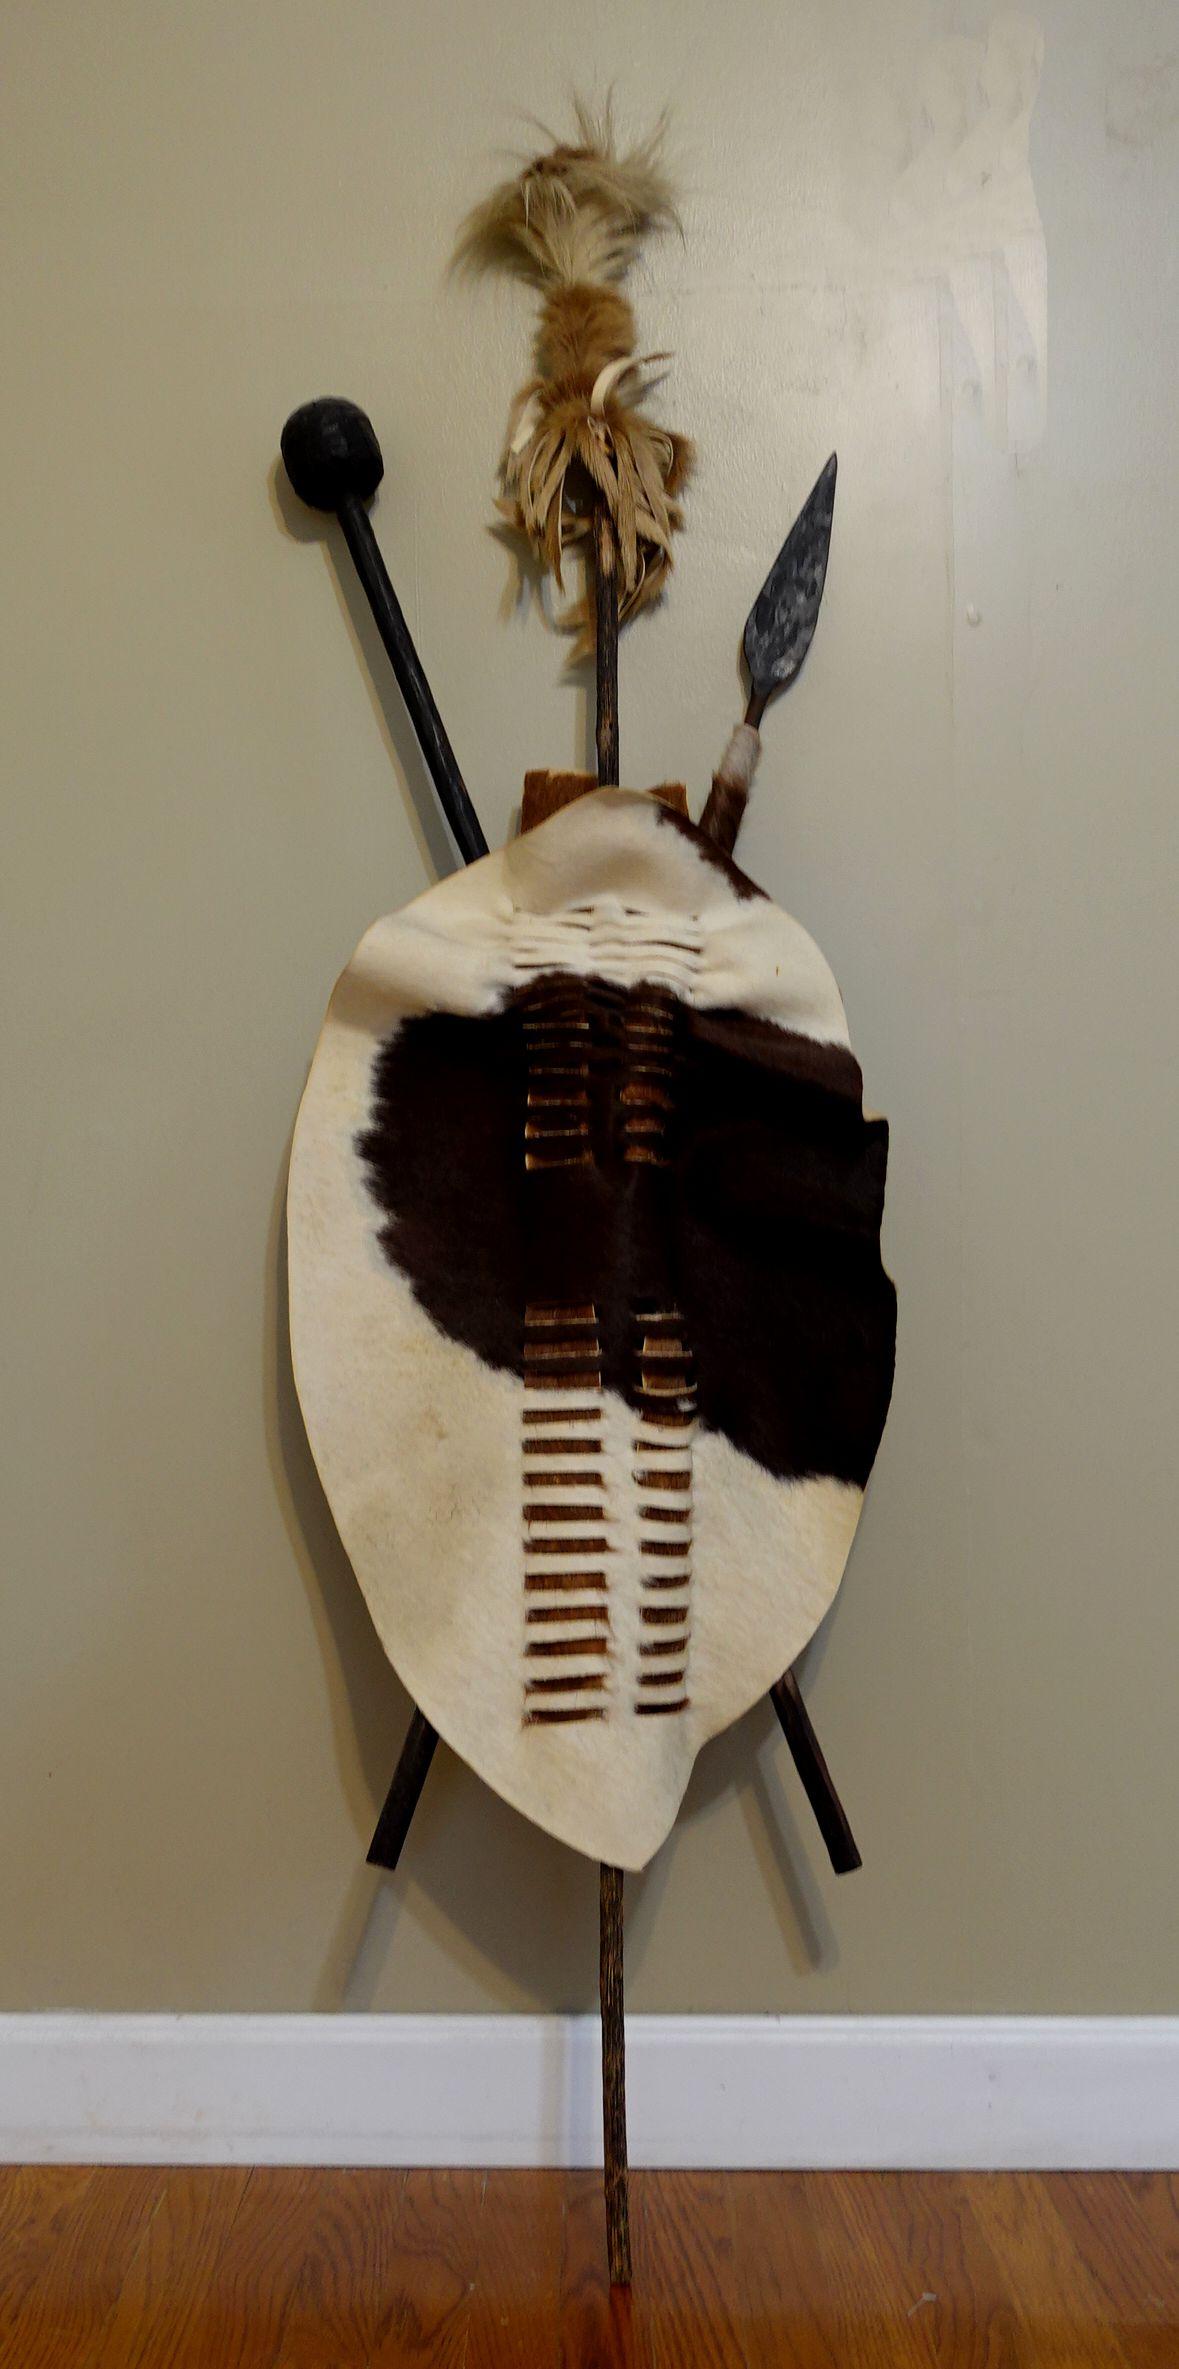 Rare artwork by the tribe of Zulu in Africa, the native weapon to attack the enemy and animal, and protect oneself. It's a typical form to have a Cowhide Shield with Spear and Mallet crossed and connected with hide and tall pom on the top.